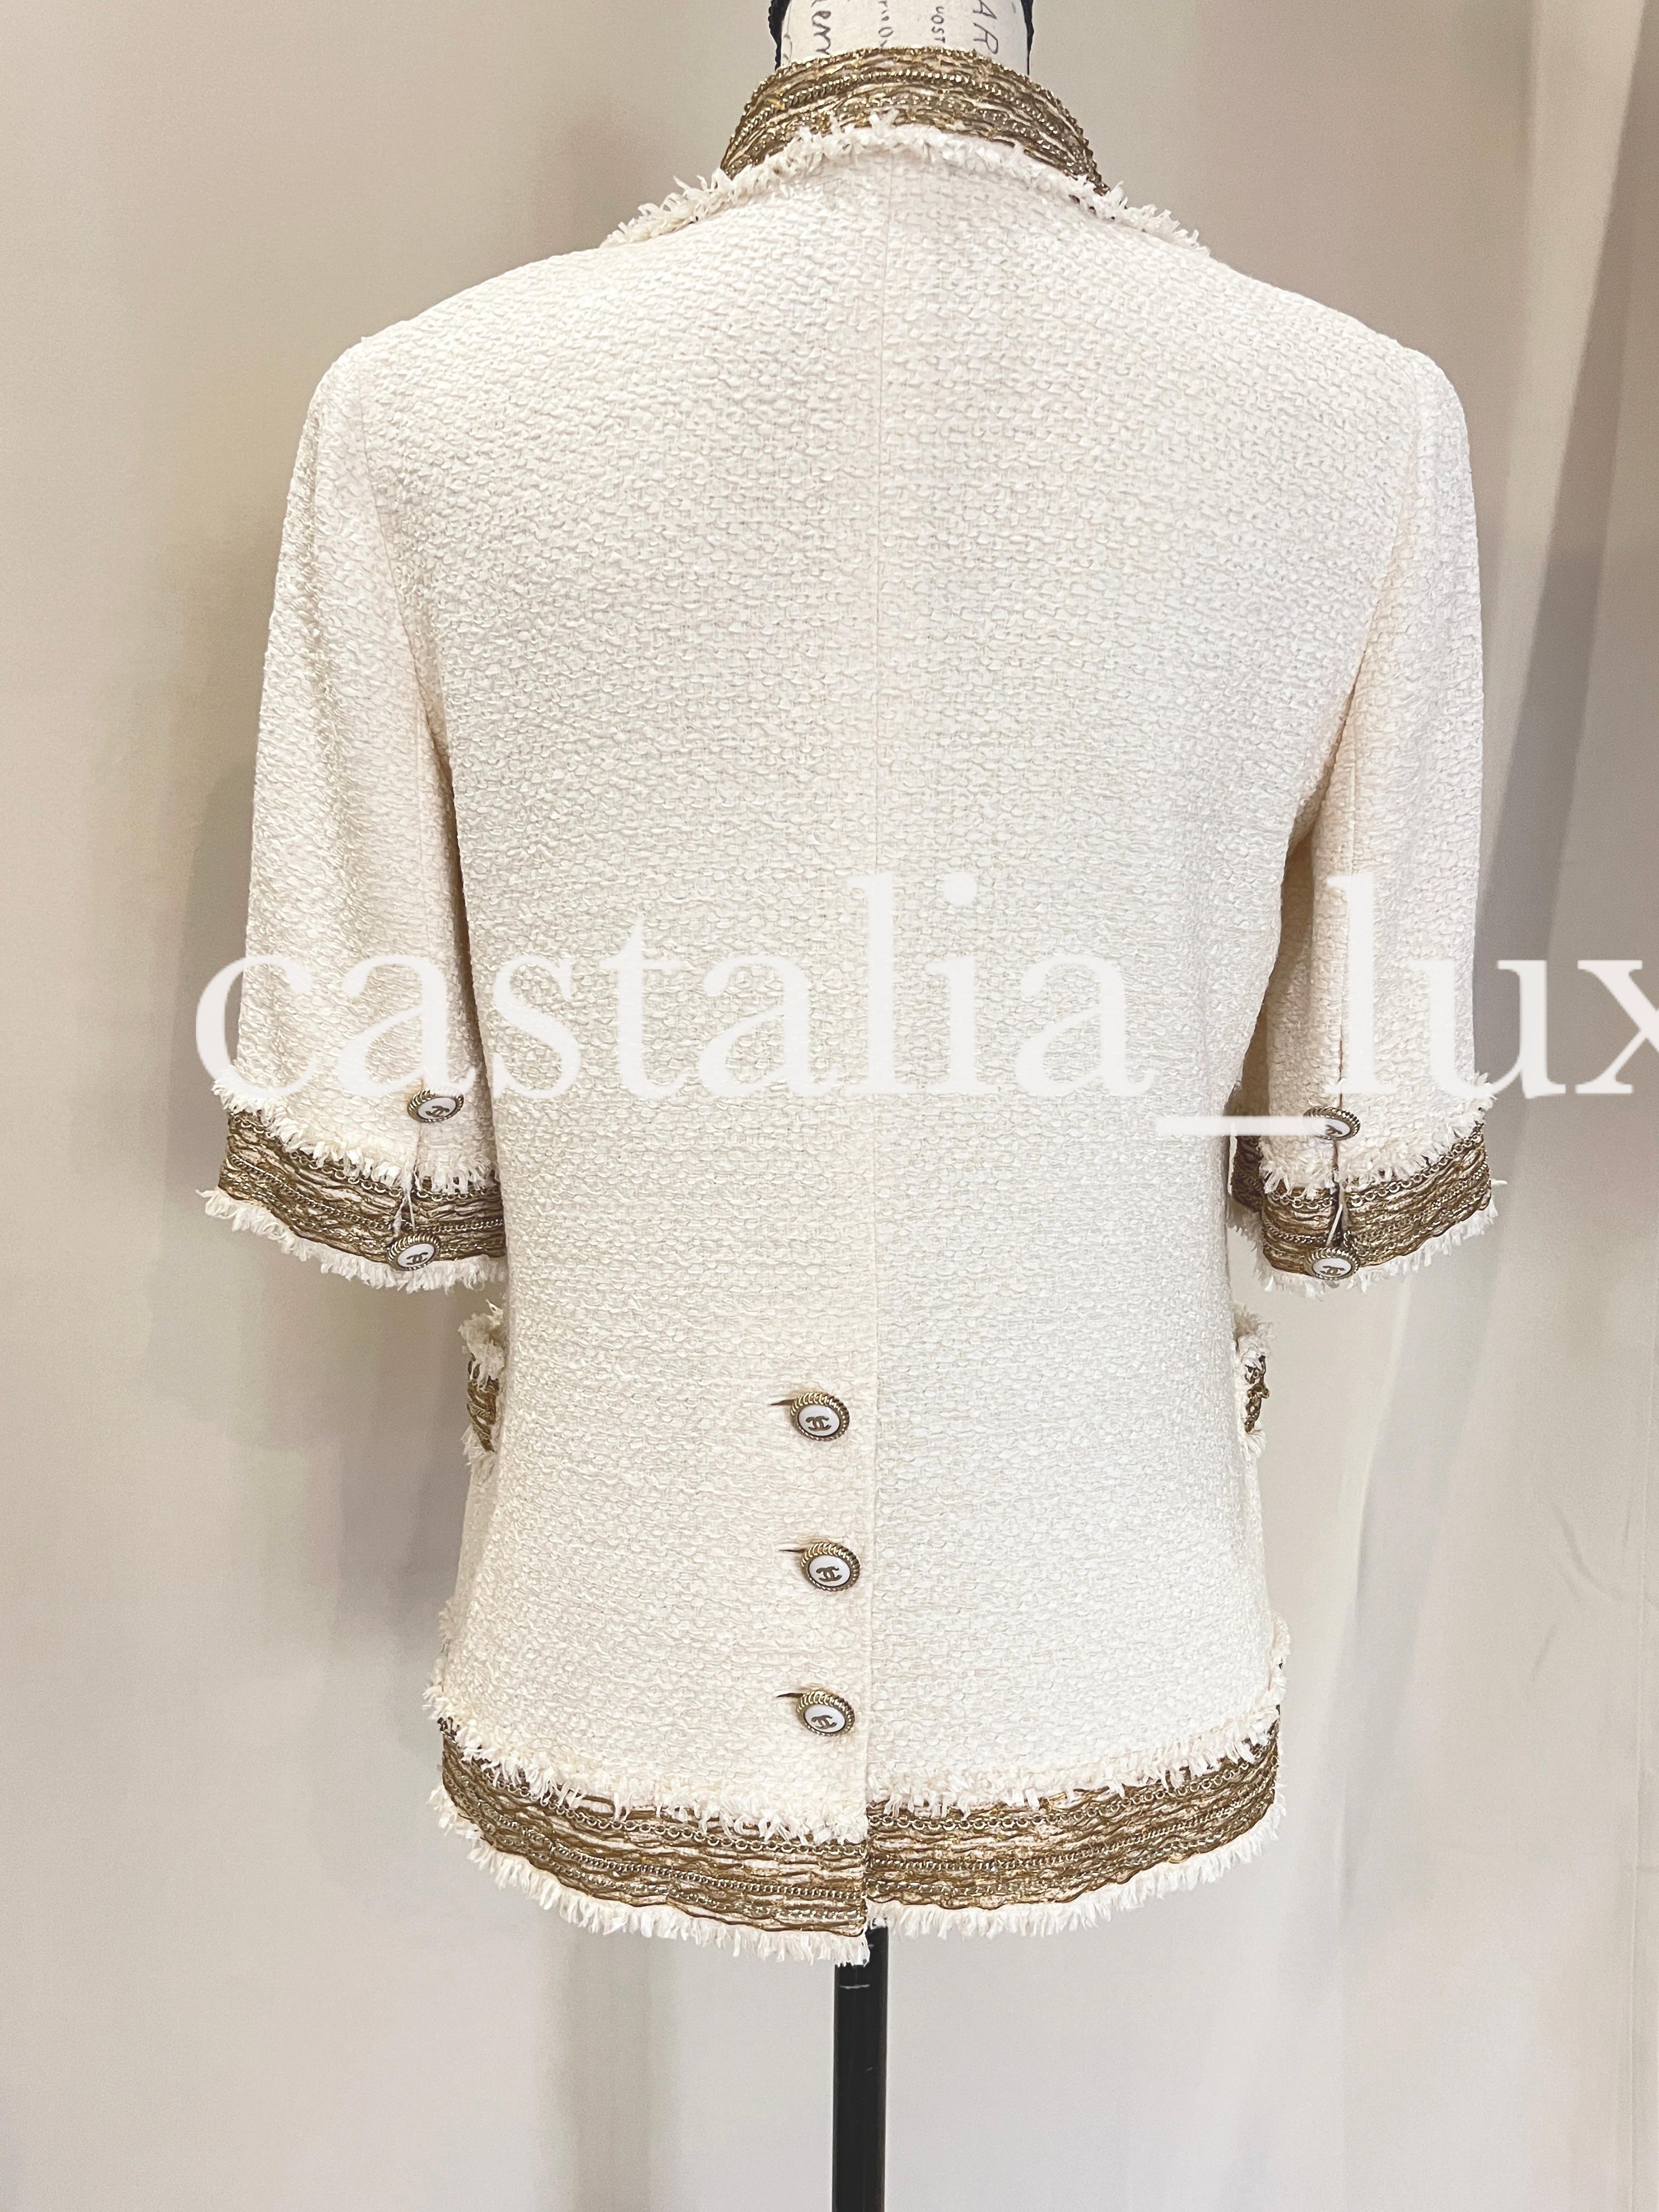 Chanel New Super Rare Chain Embellished Tweed Jacket 4